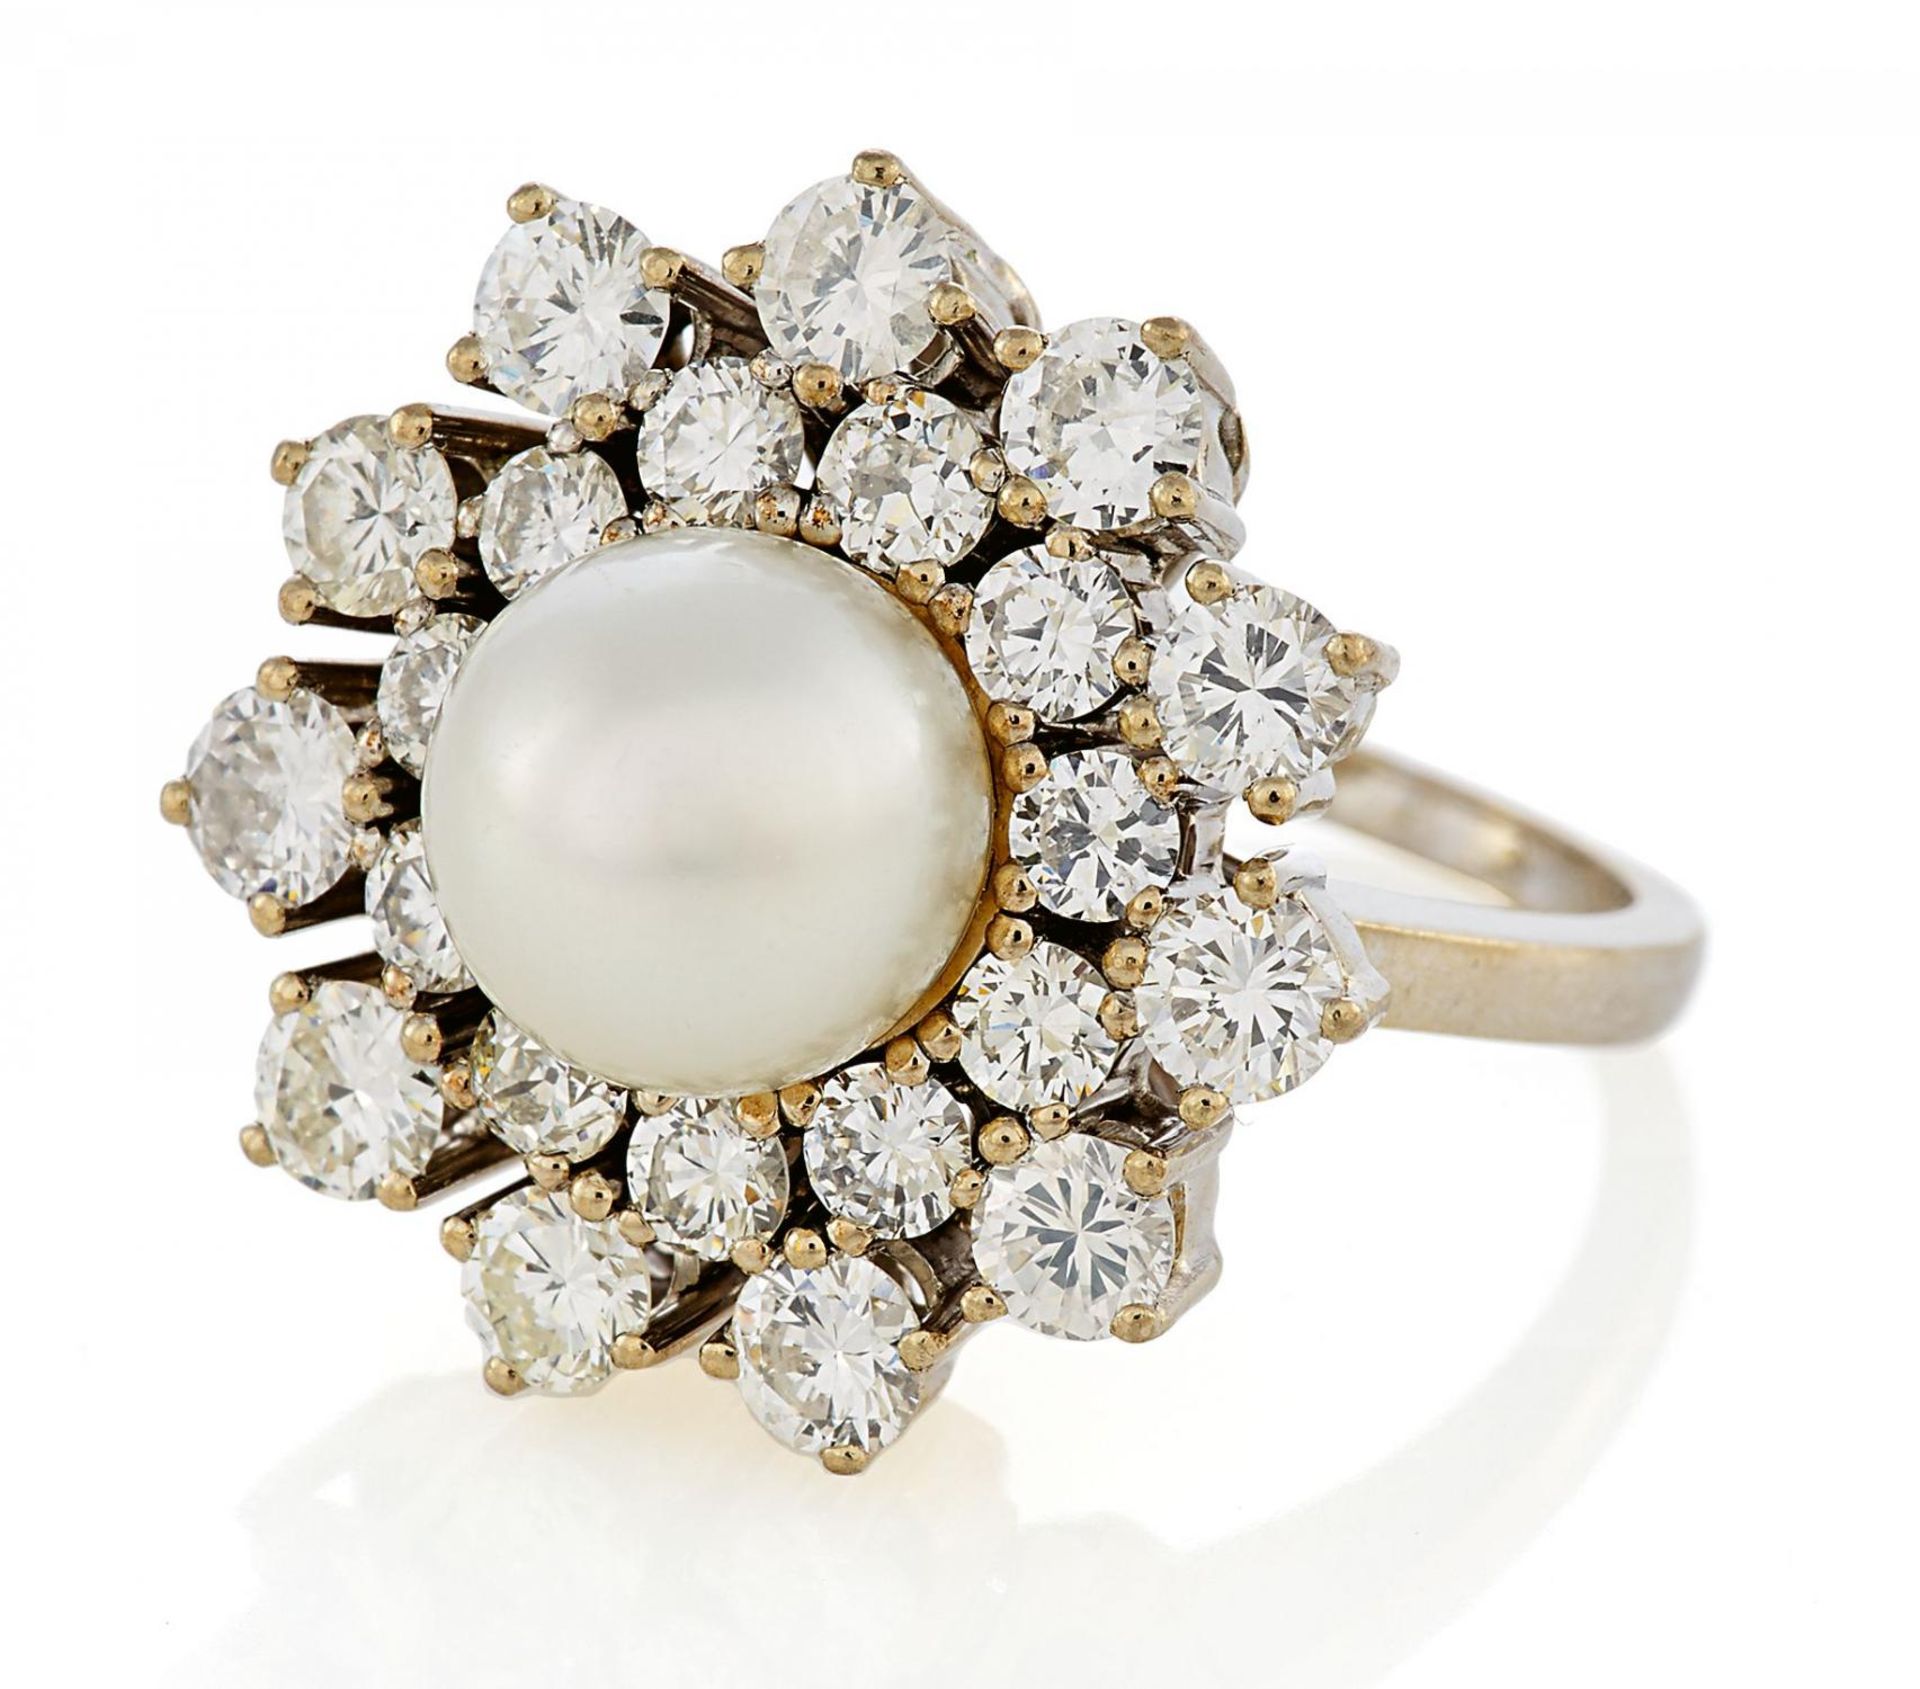 PEARL-DIAMOND-RING. Origin: Germany. Date: 1980s. Material: 585/- white gold, with mark. Total